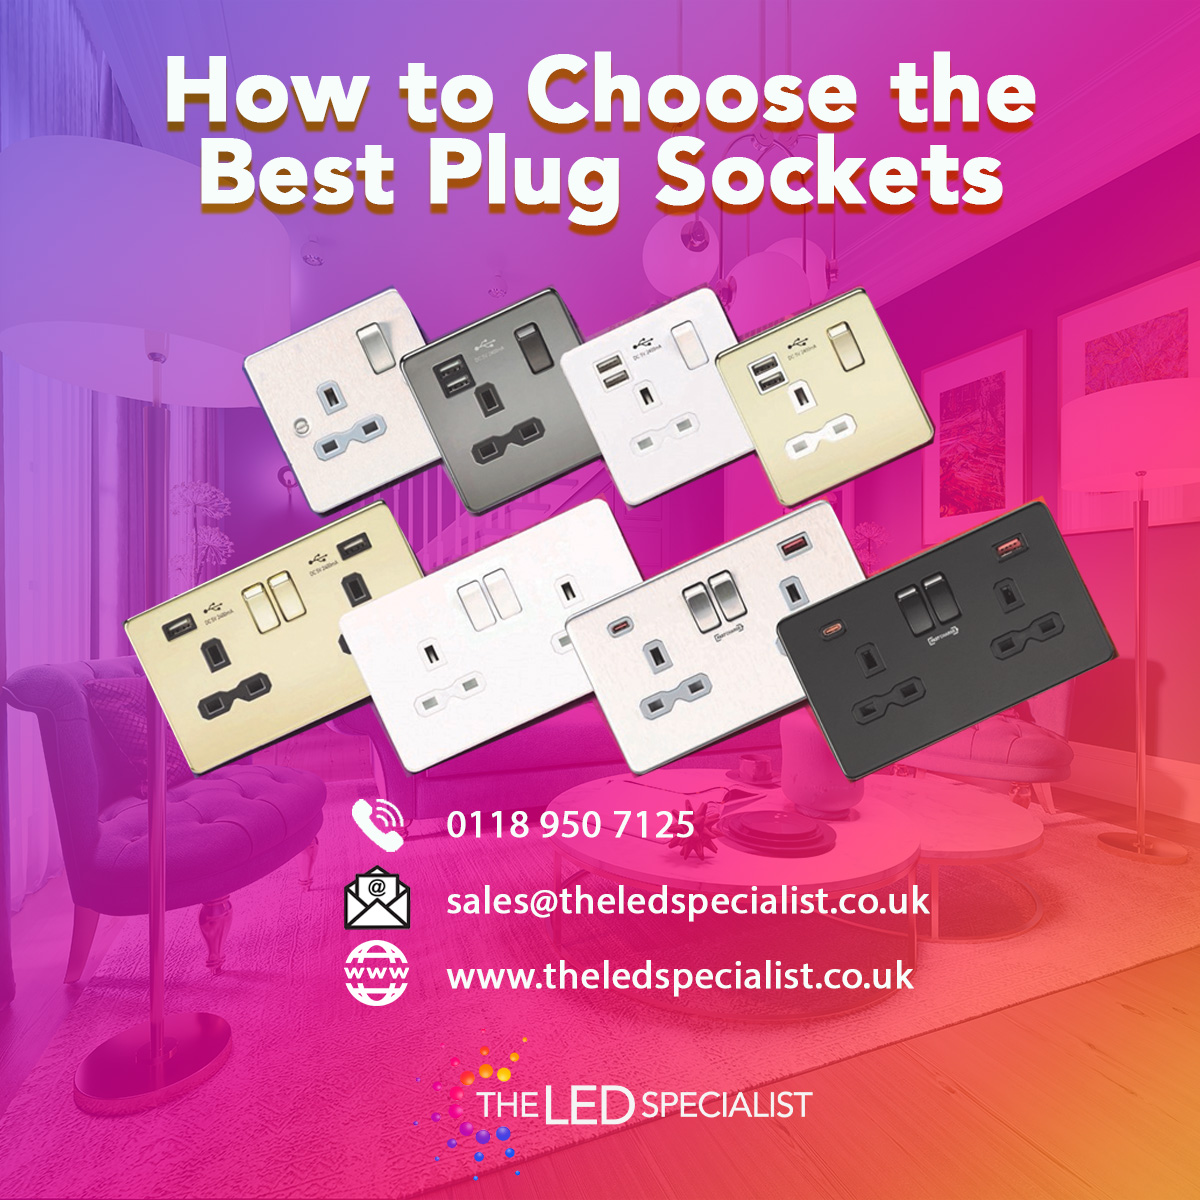 How to Choose the best plug sockets